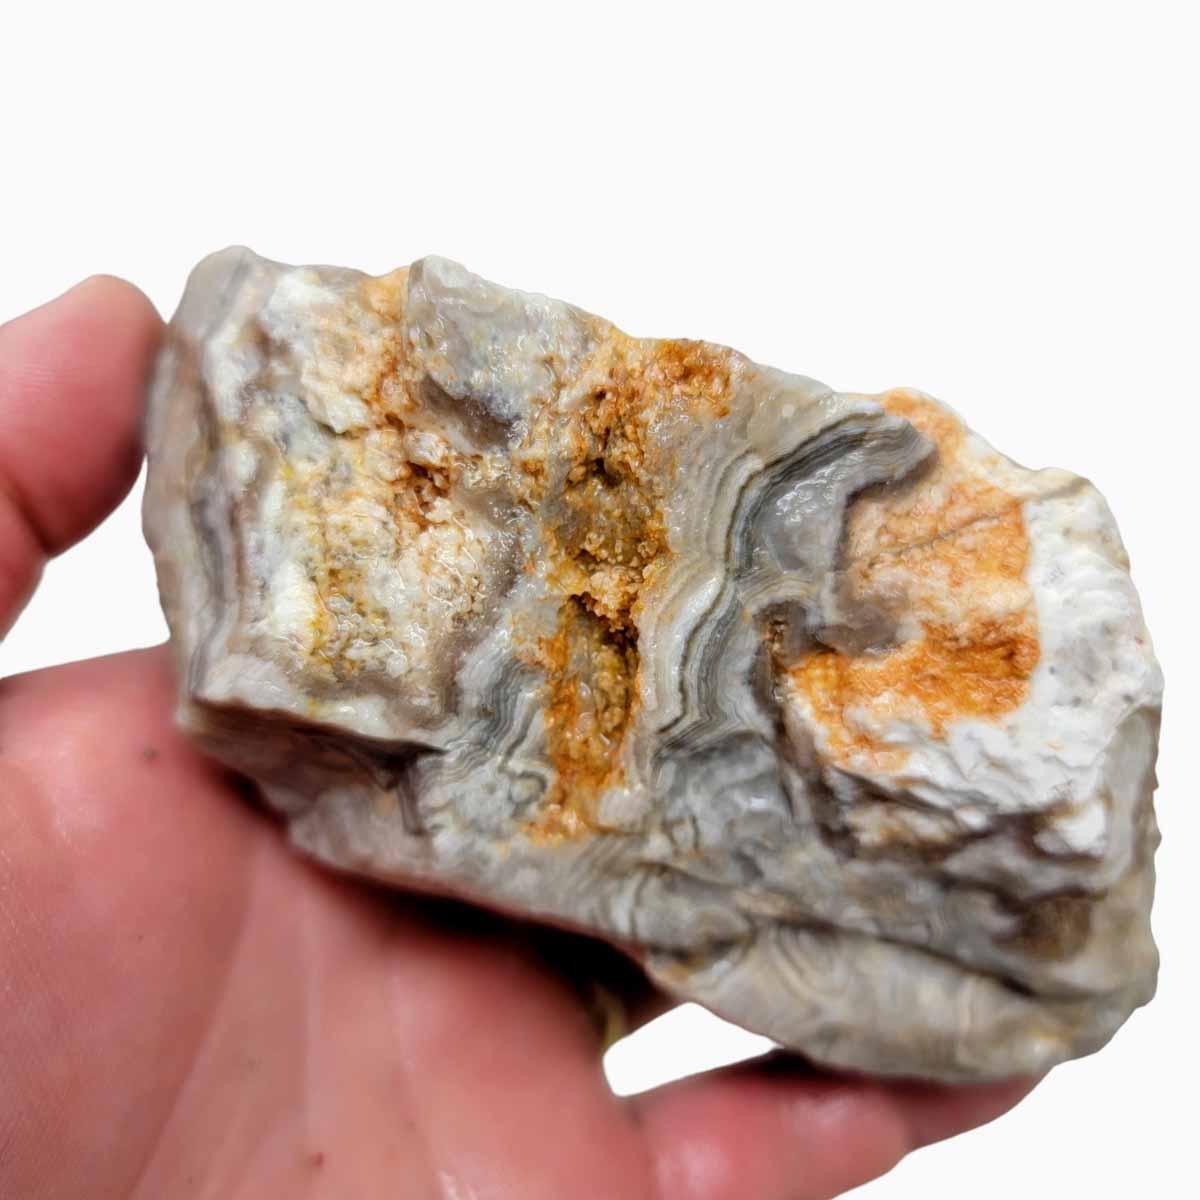 Summerville Crazy Lace Agate Lapidary Rough Chunk! - LapidaryCentral